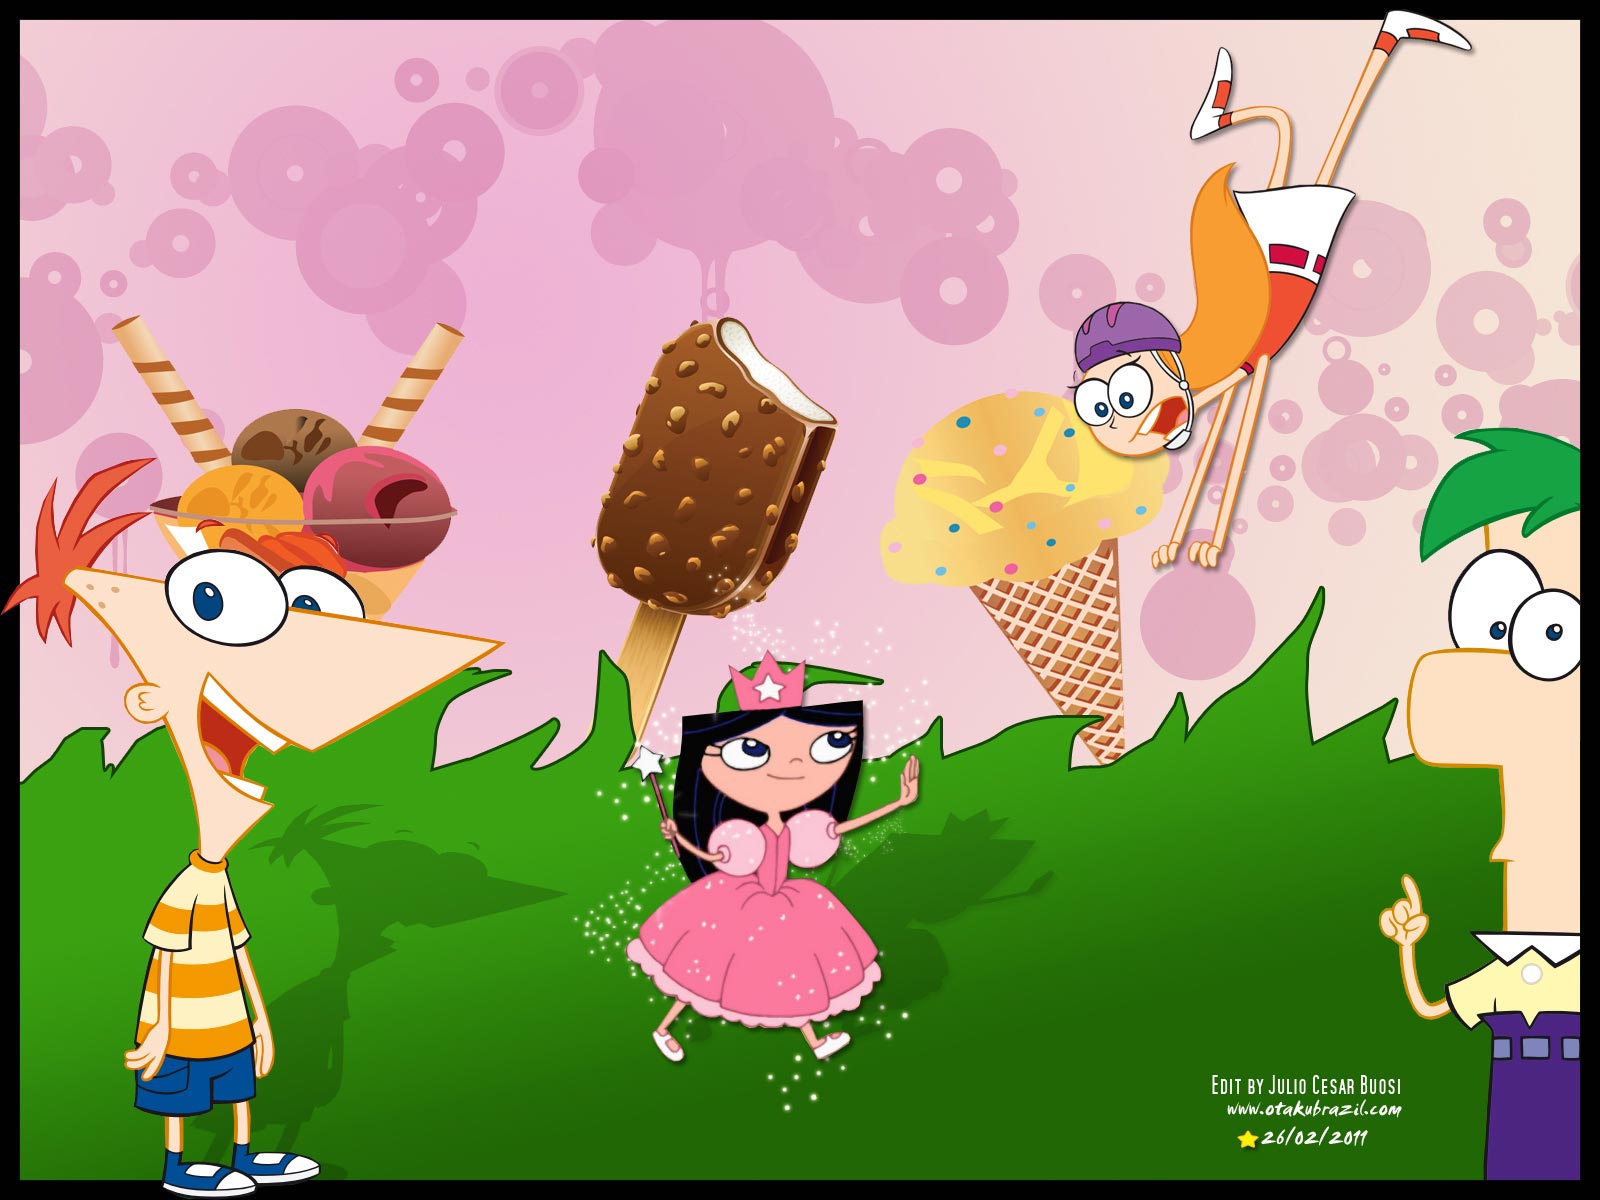 Phineas & Ferb - Phineas and Ferb Wallpaper (31450084) - Fanpop